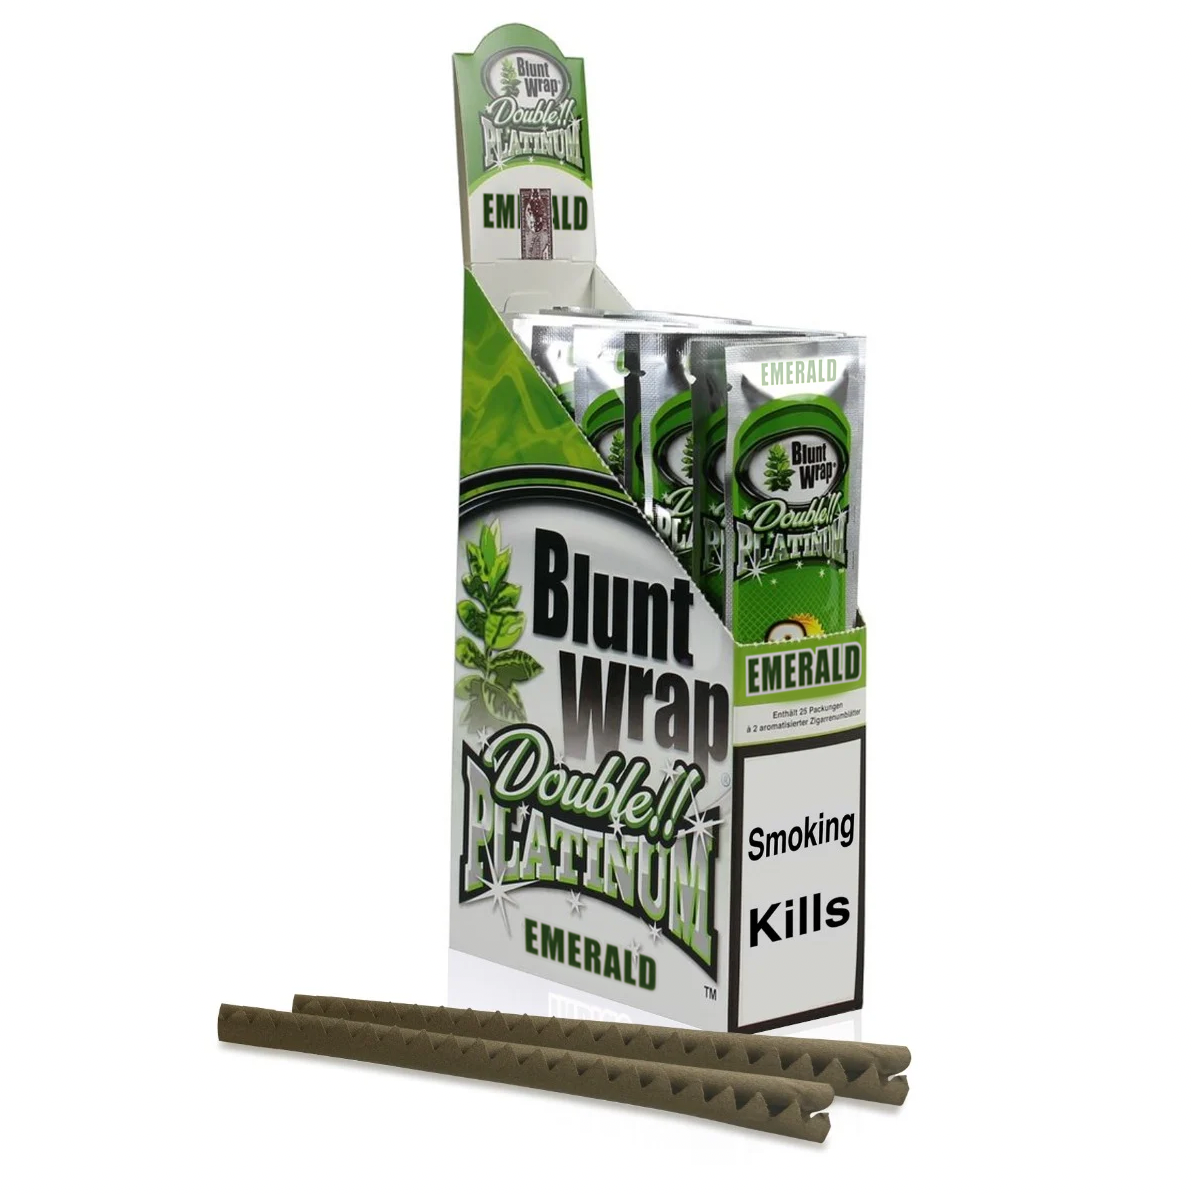 Blunt wrap double platinum - Emerald (Previously kush) - pack of 2 